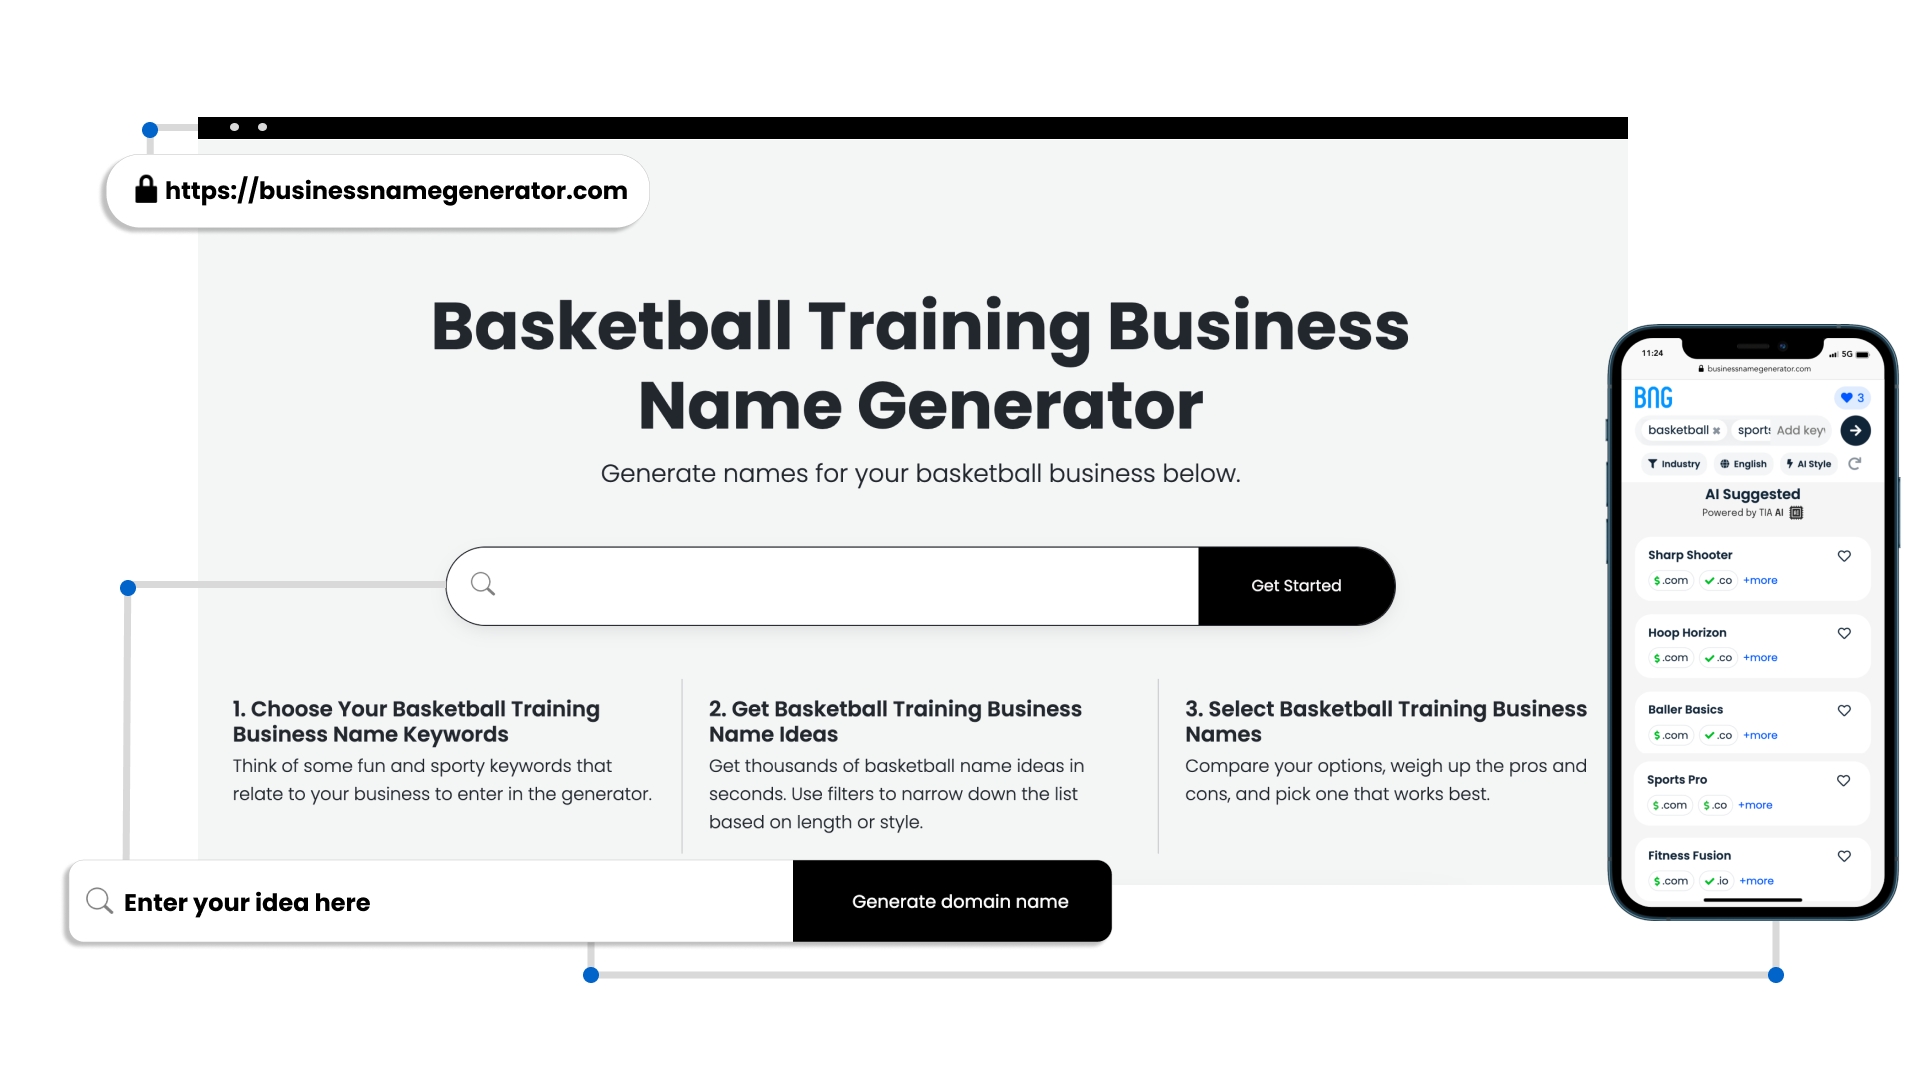 Benefits of Our Basketball Training Business Name Generator